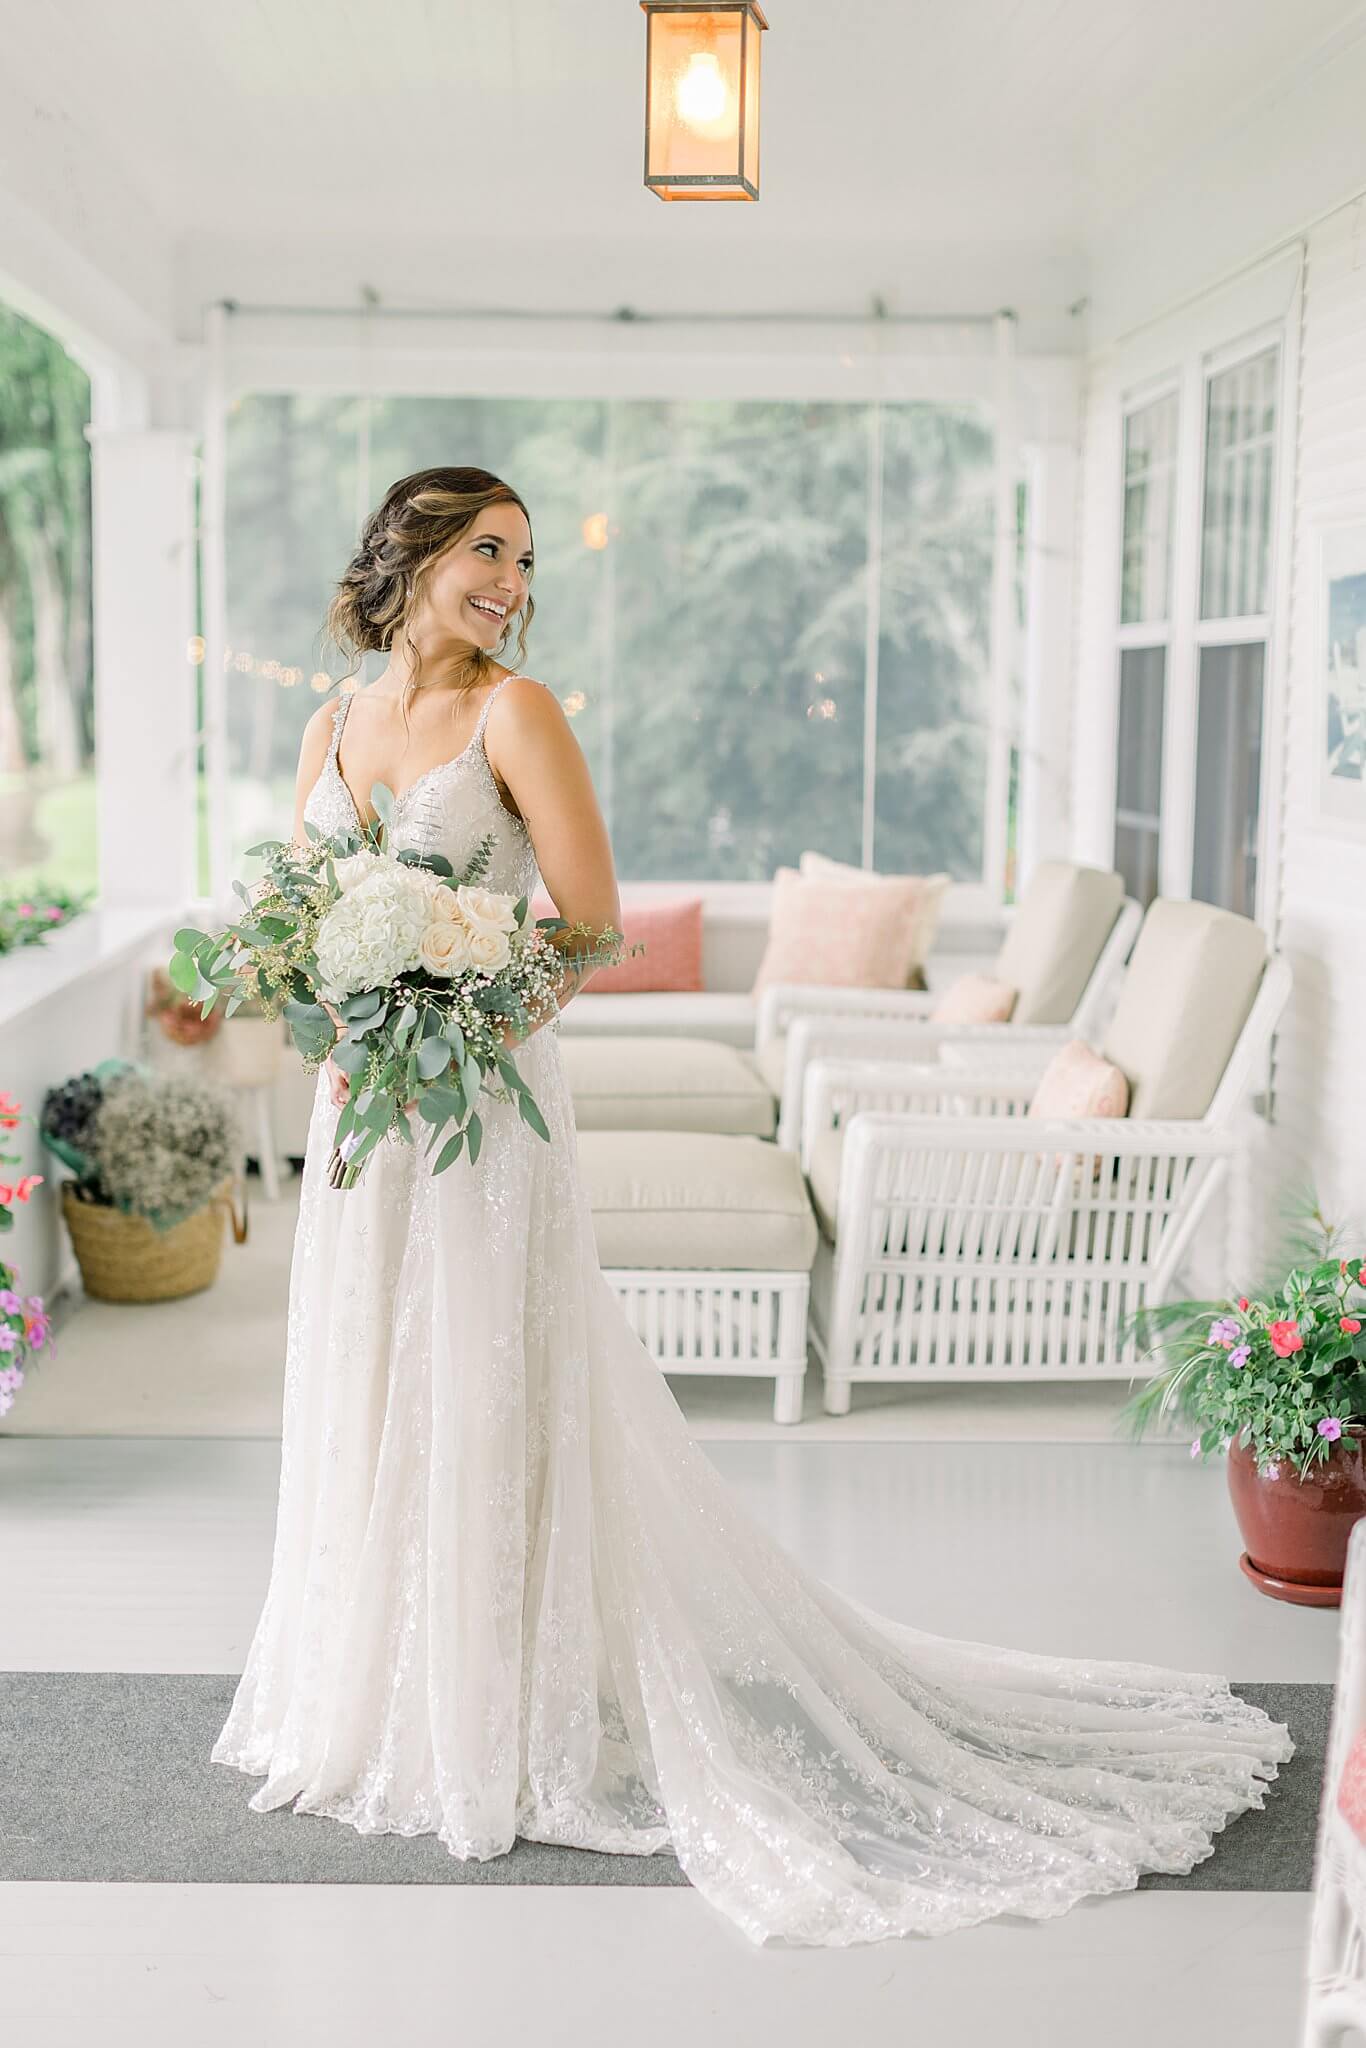 Bride smiles with bouquet during rainy Intimate Northern Michigan Wedding day.